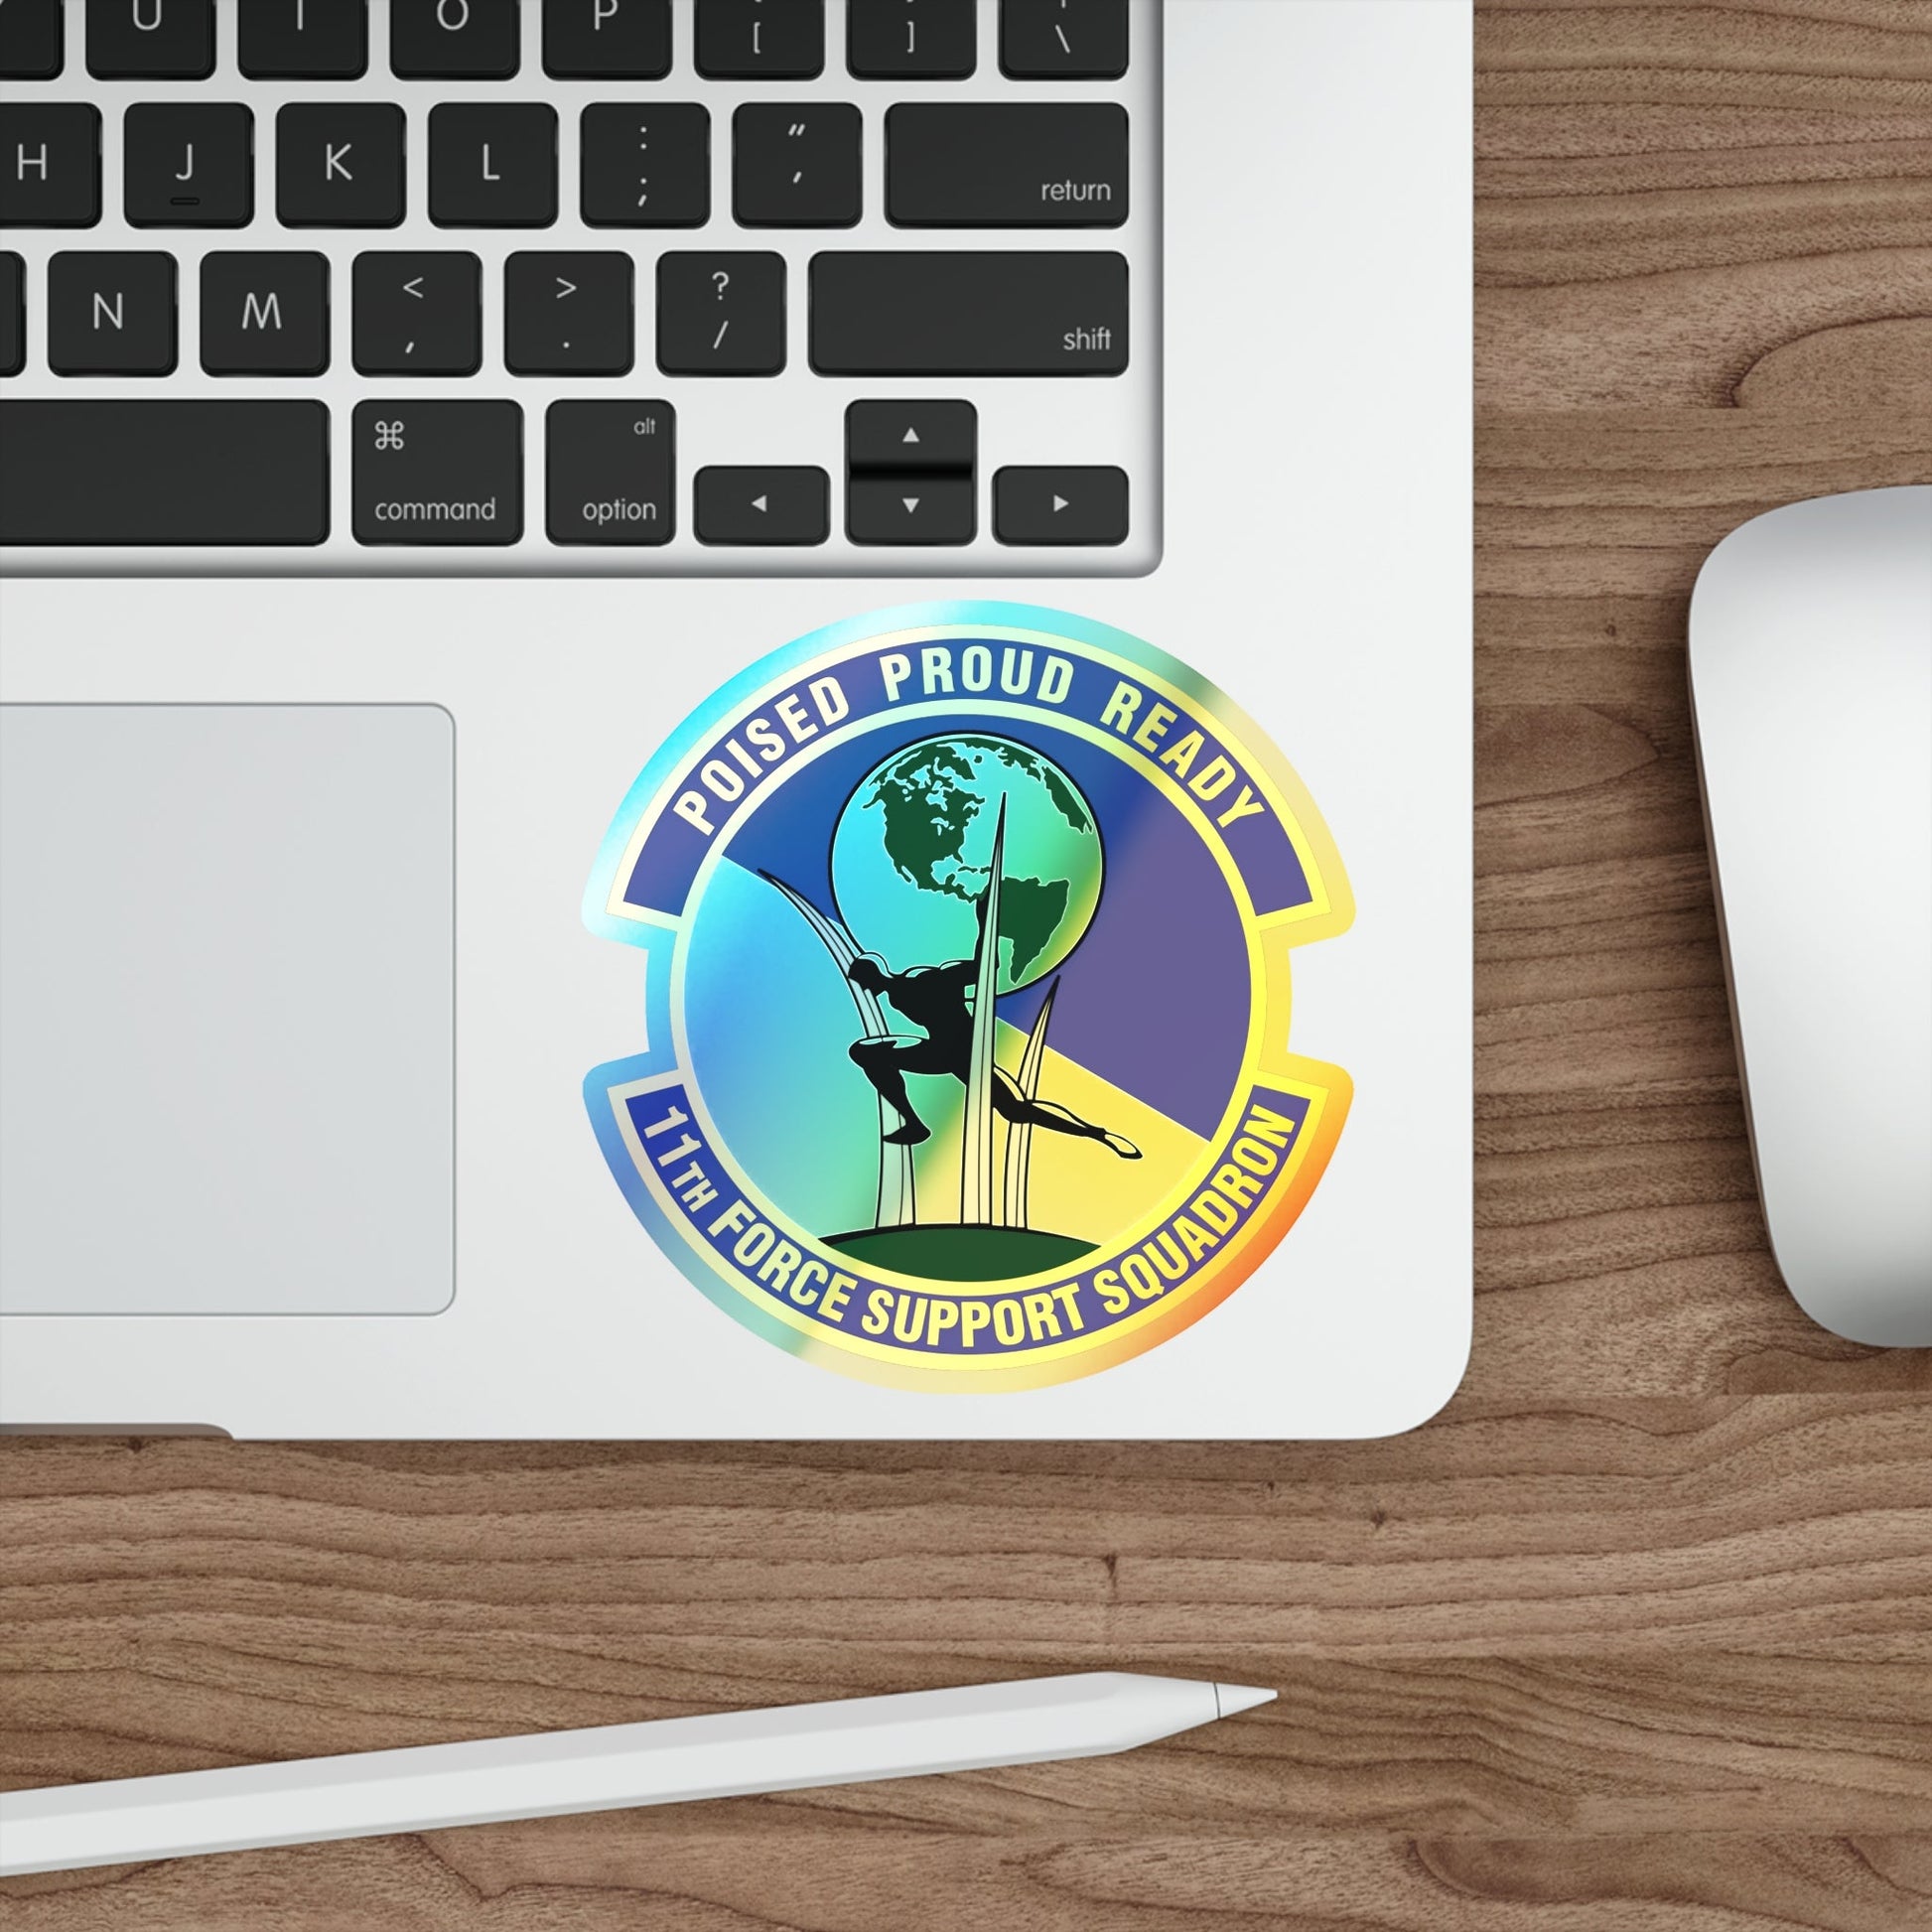 11 Force Support Squadron USAF (U.S. Air Force) Holographic STICKER Die-Cut Vinyl Decal-The Sticker Space